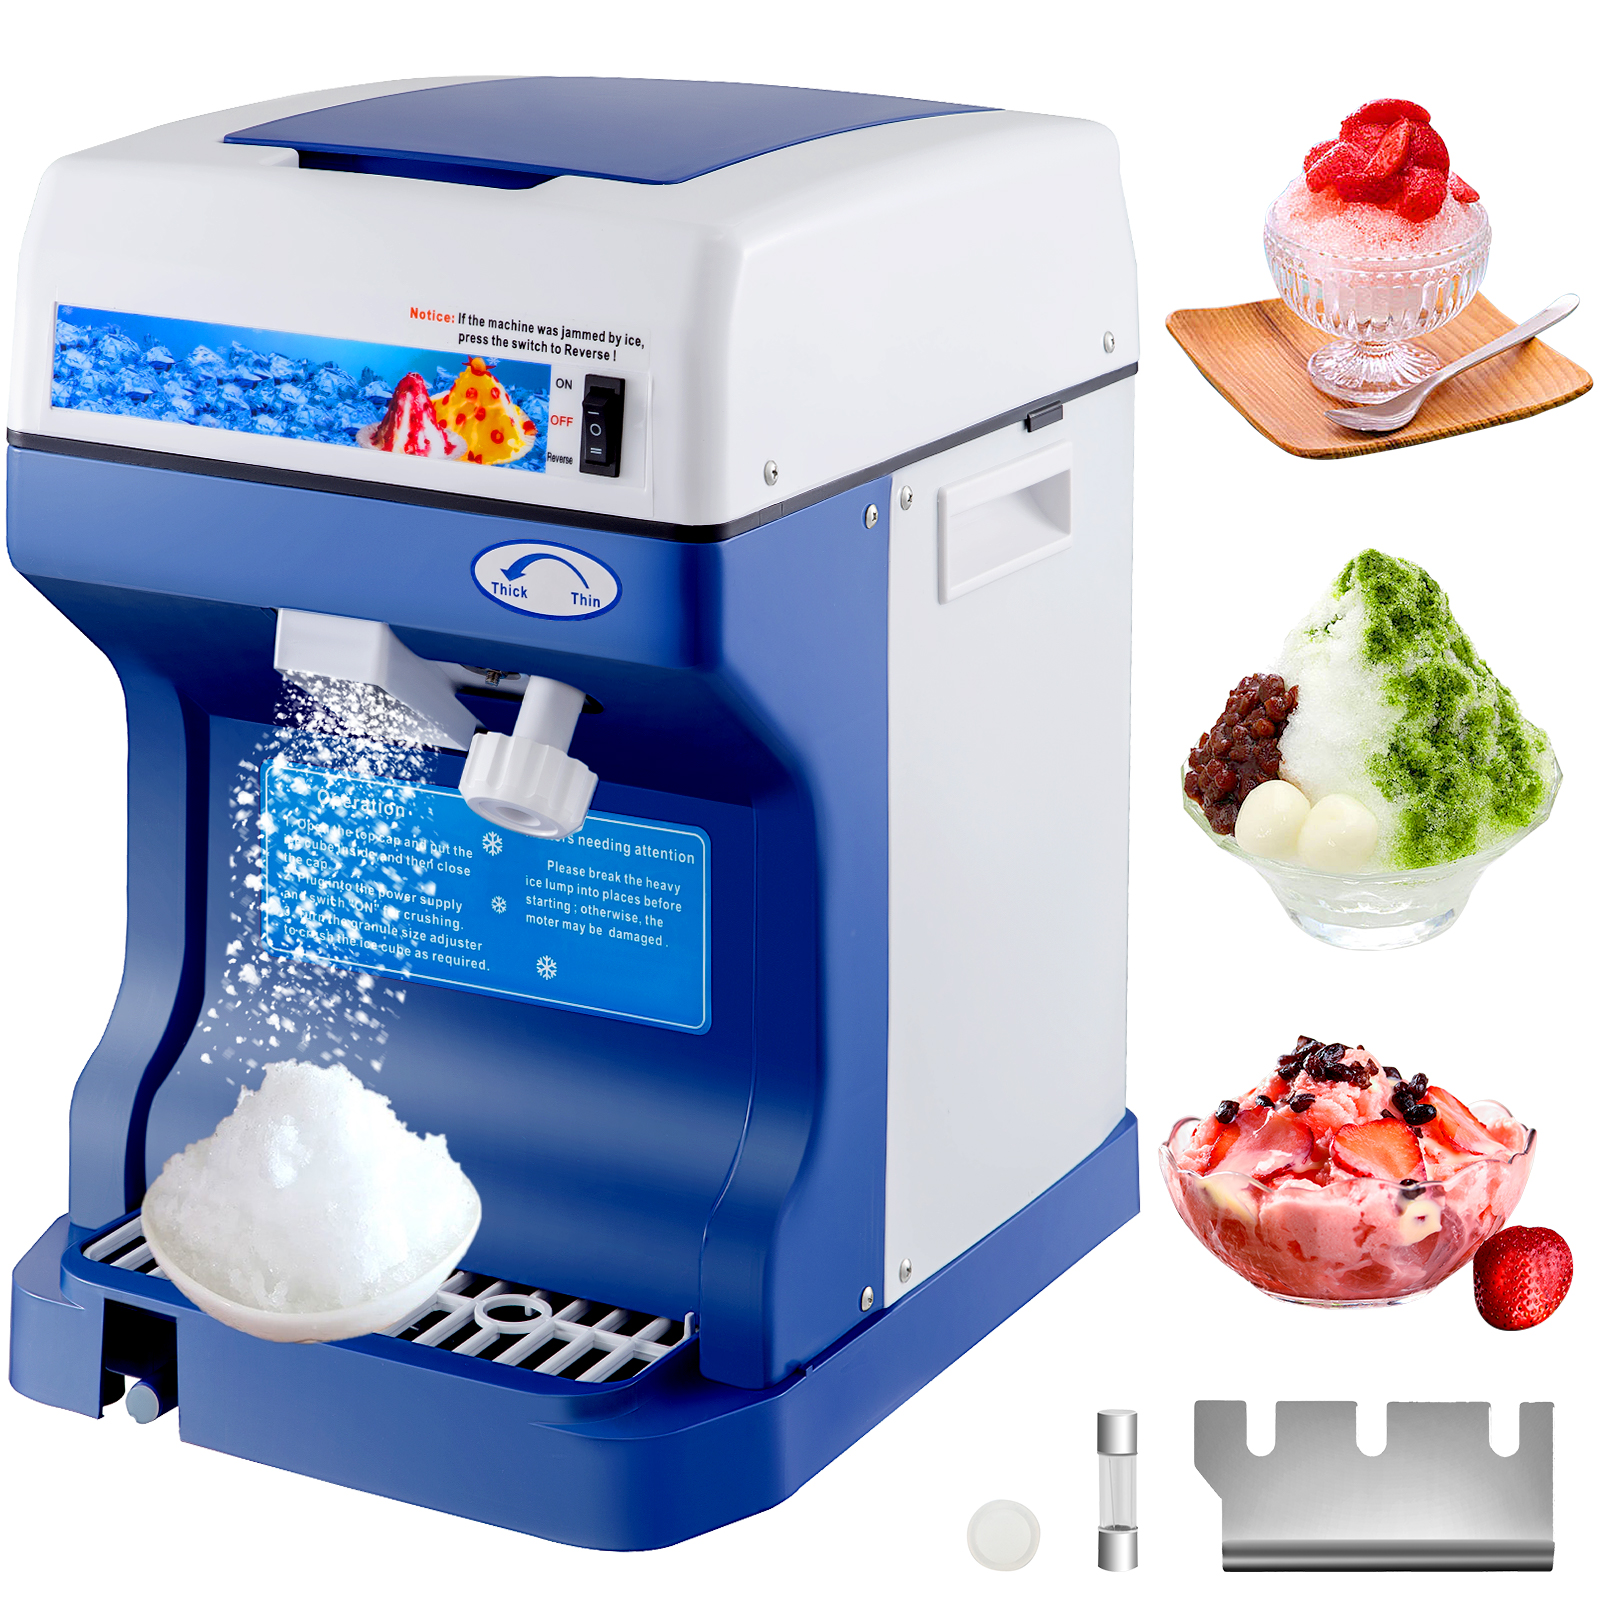 Shaved ice machine for home